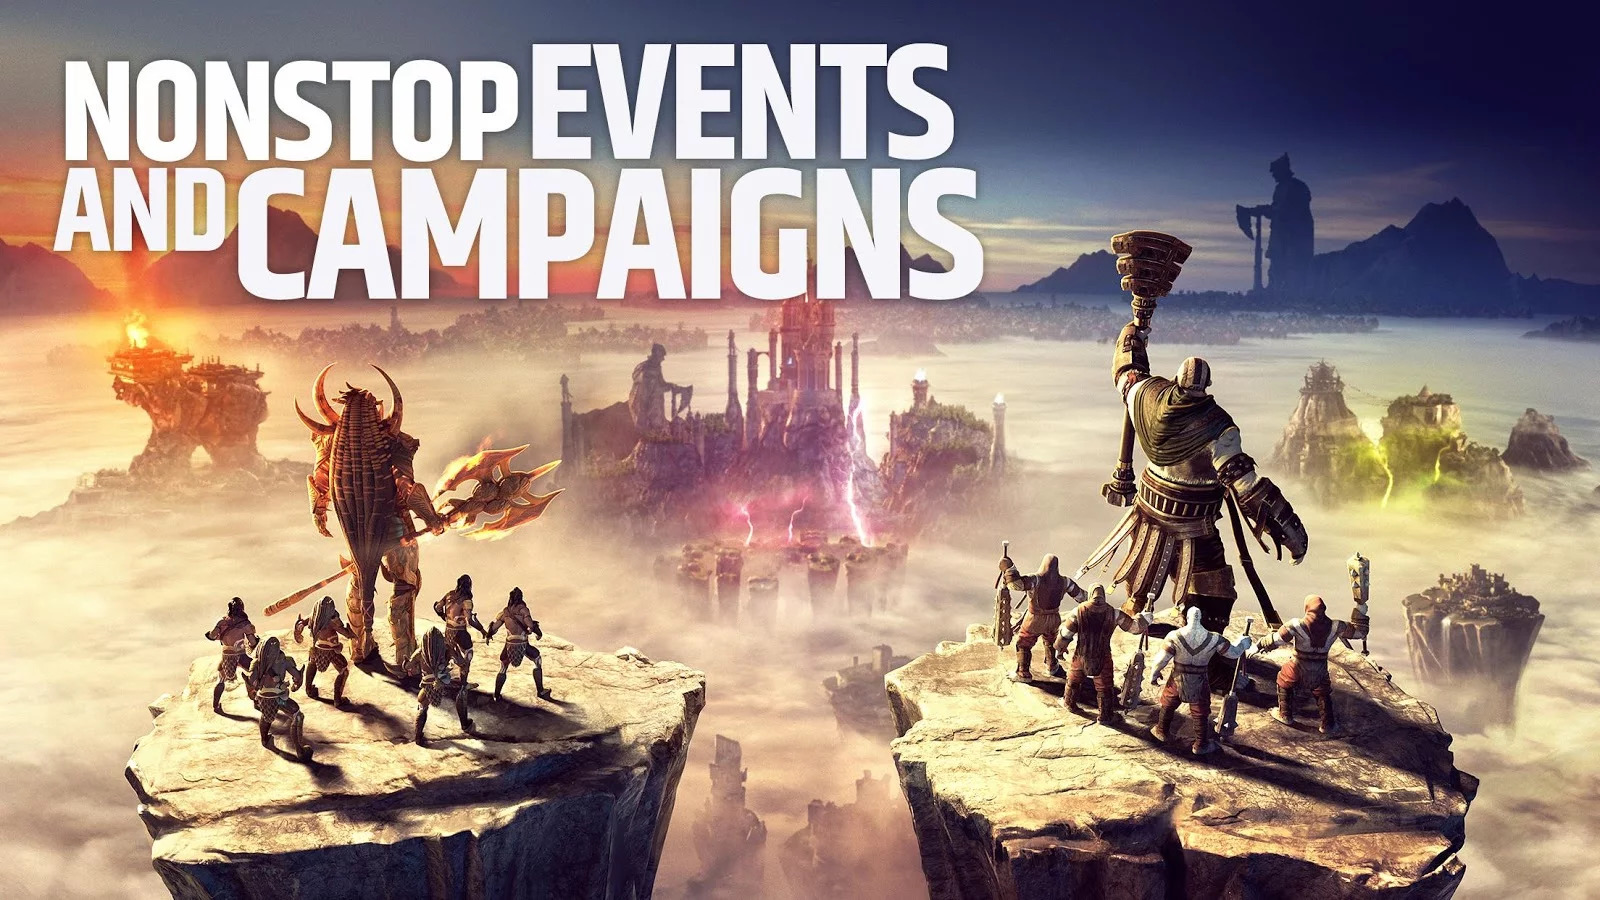 Dawn of Titans has non-stop events and campaigns